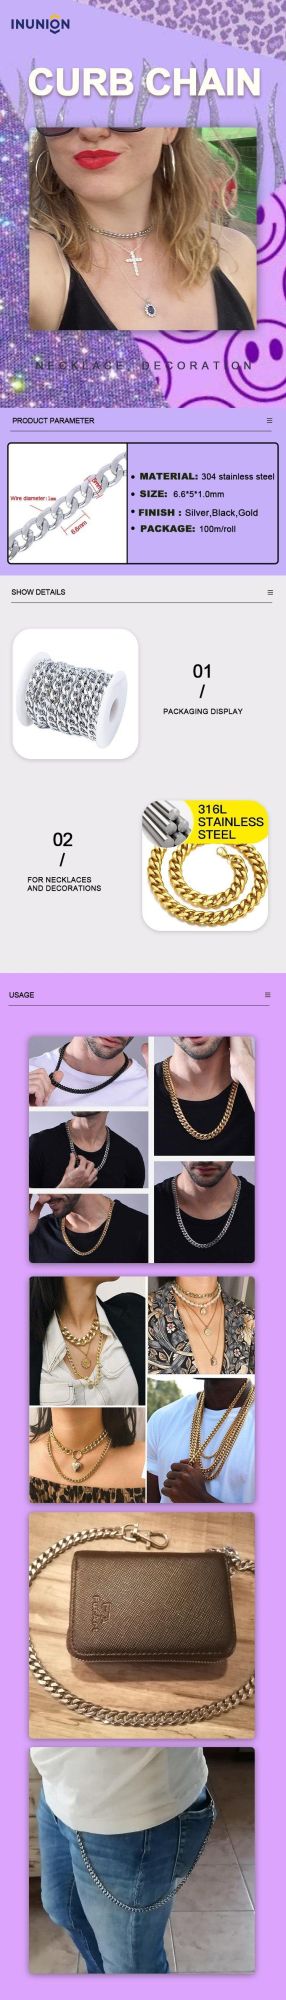 Punk Stainless Steel 3/5/7mm Curb Cuban Necklaces for Men Women Black Gold Basic Link Chains Solid Metal Jewelry Gift